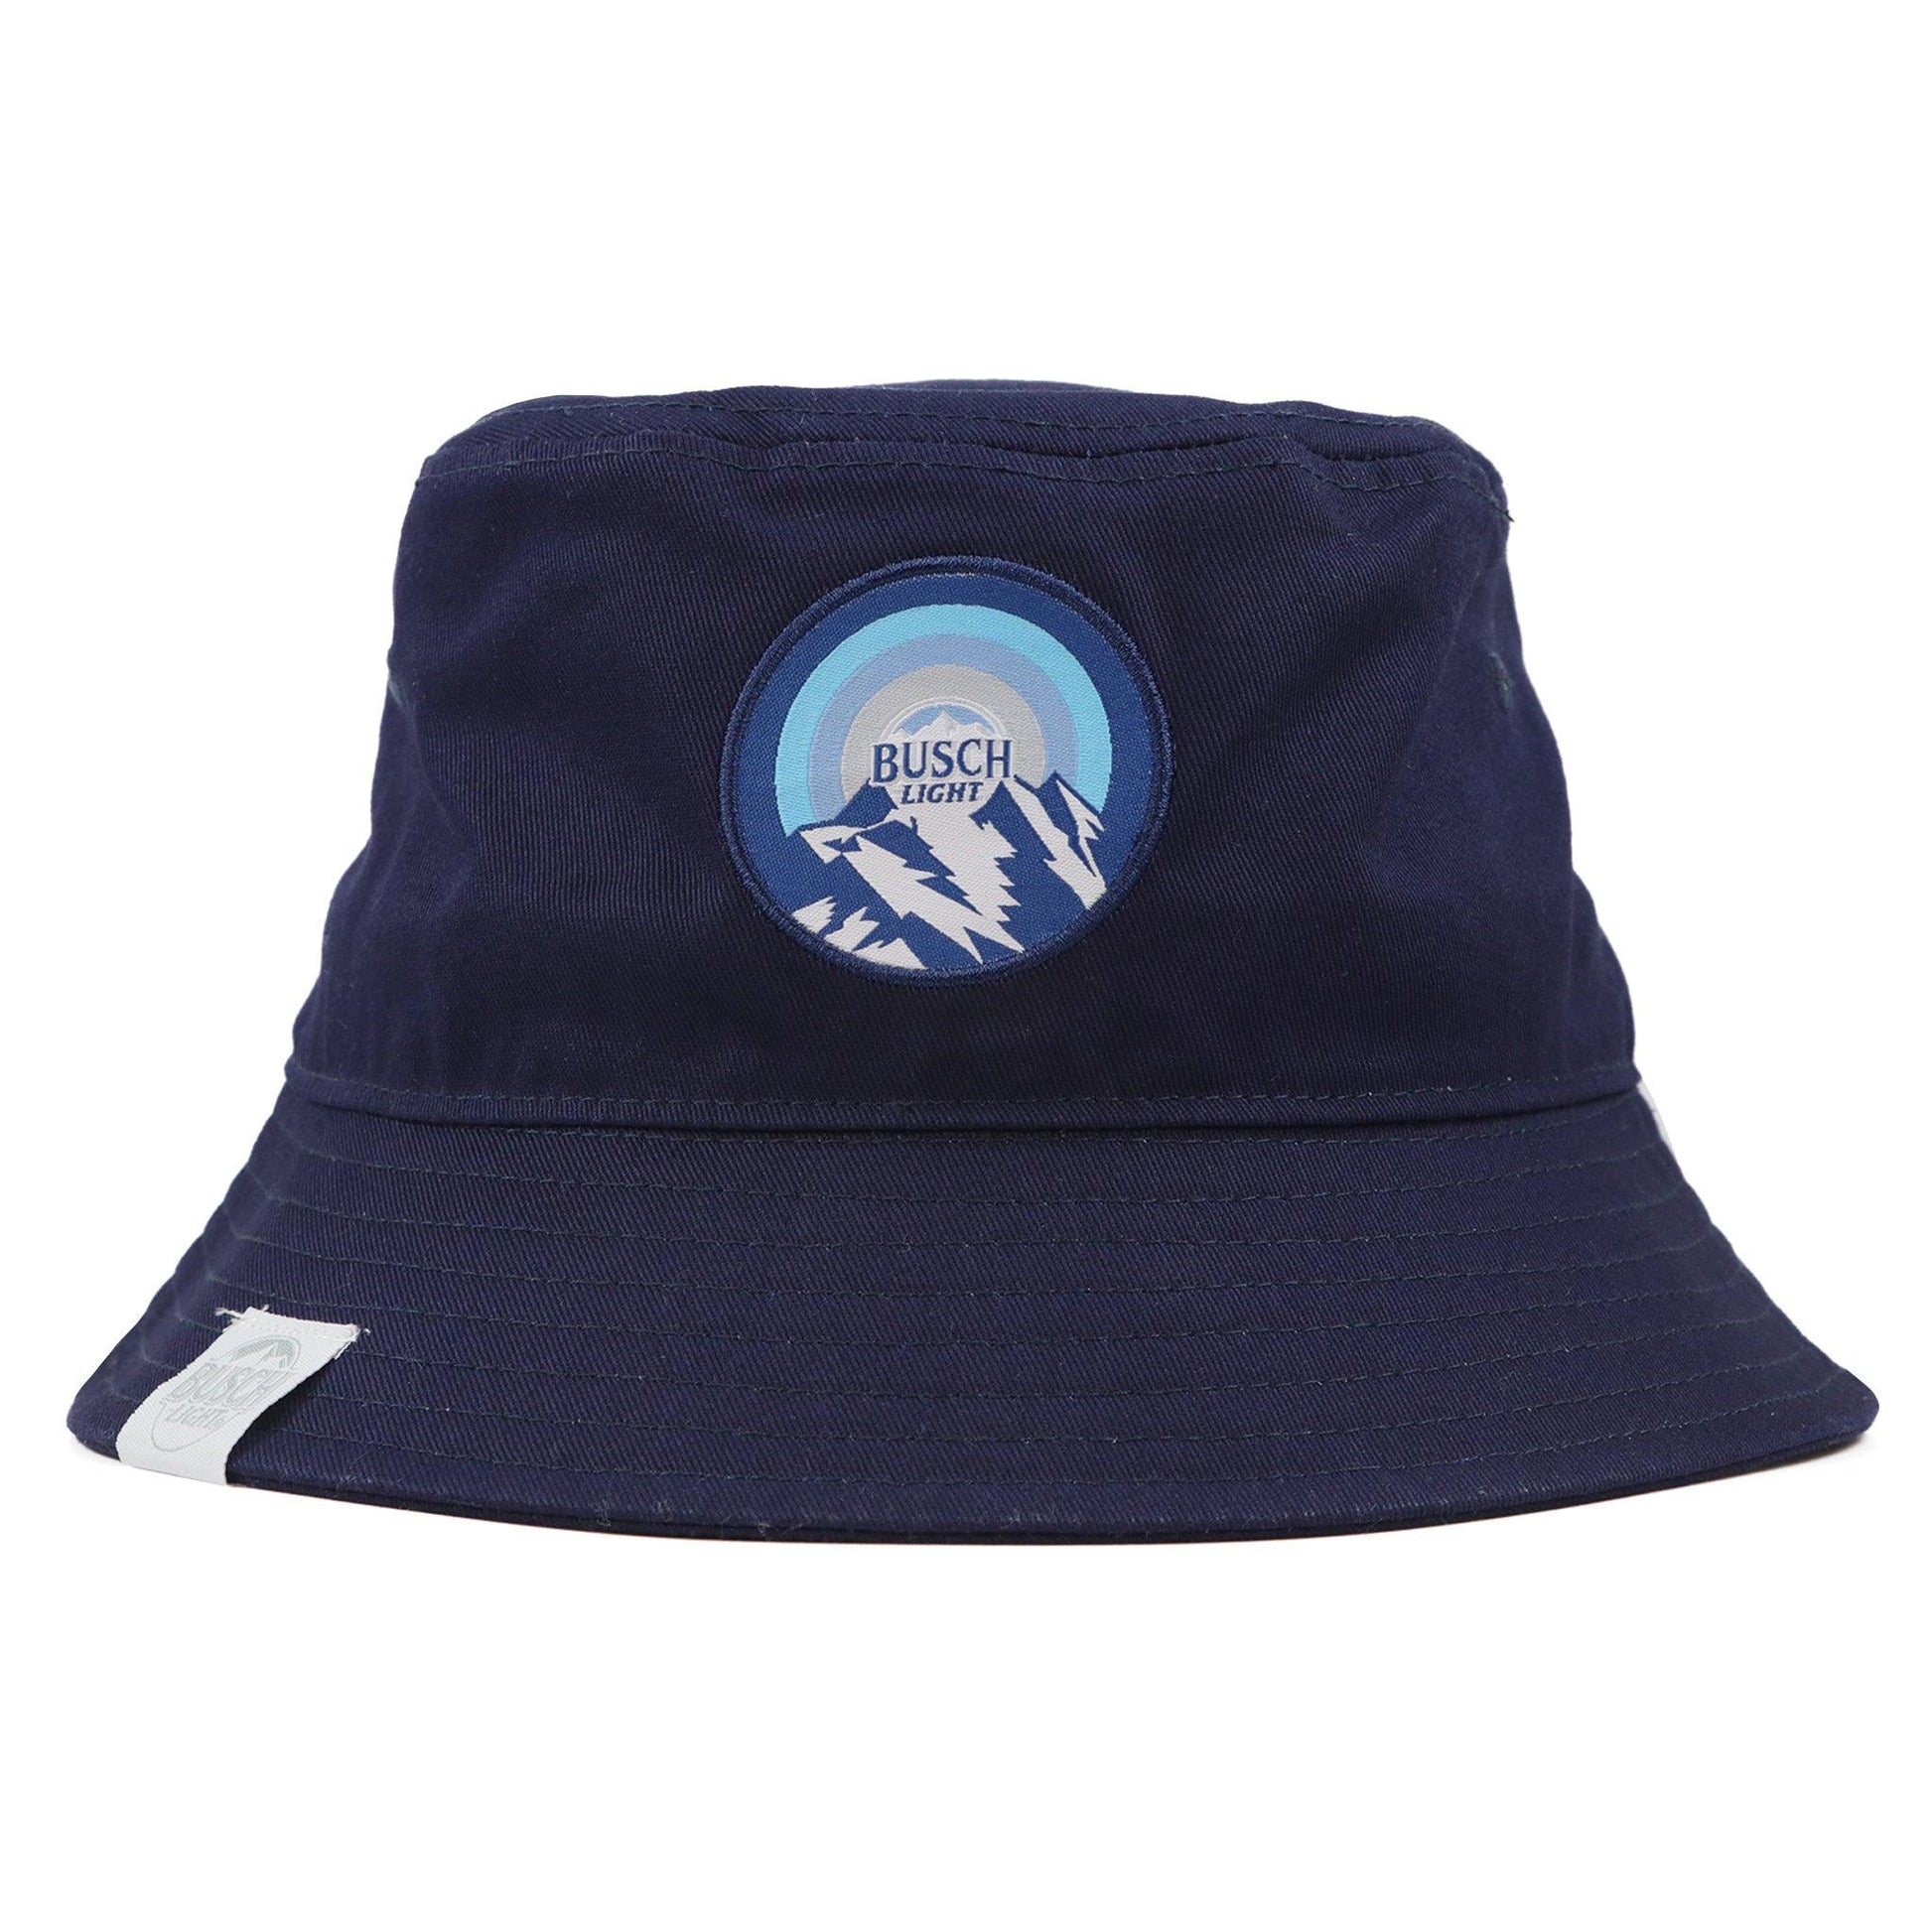 Navy bucket hat with Busch Light patch on front and Busch Light logo tag on brim of hat.